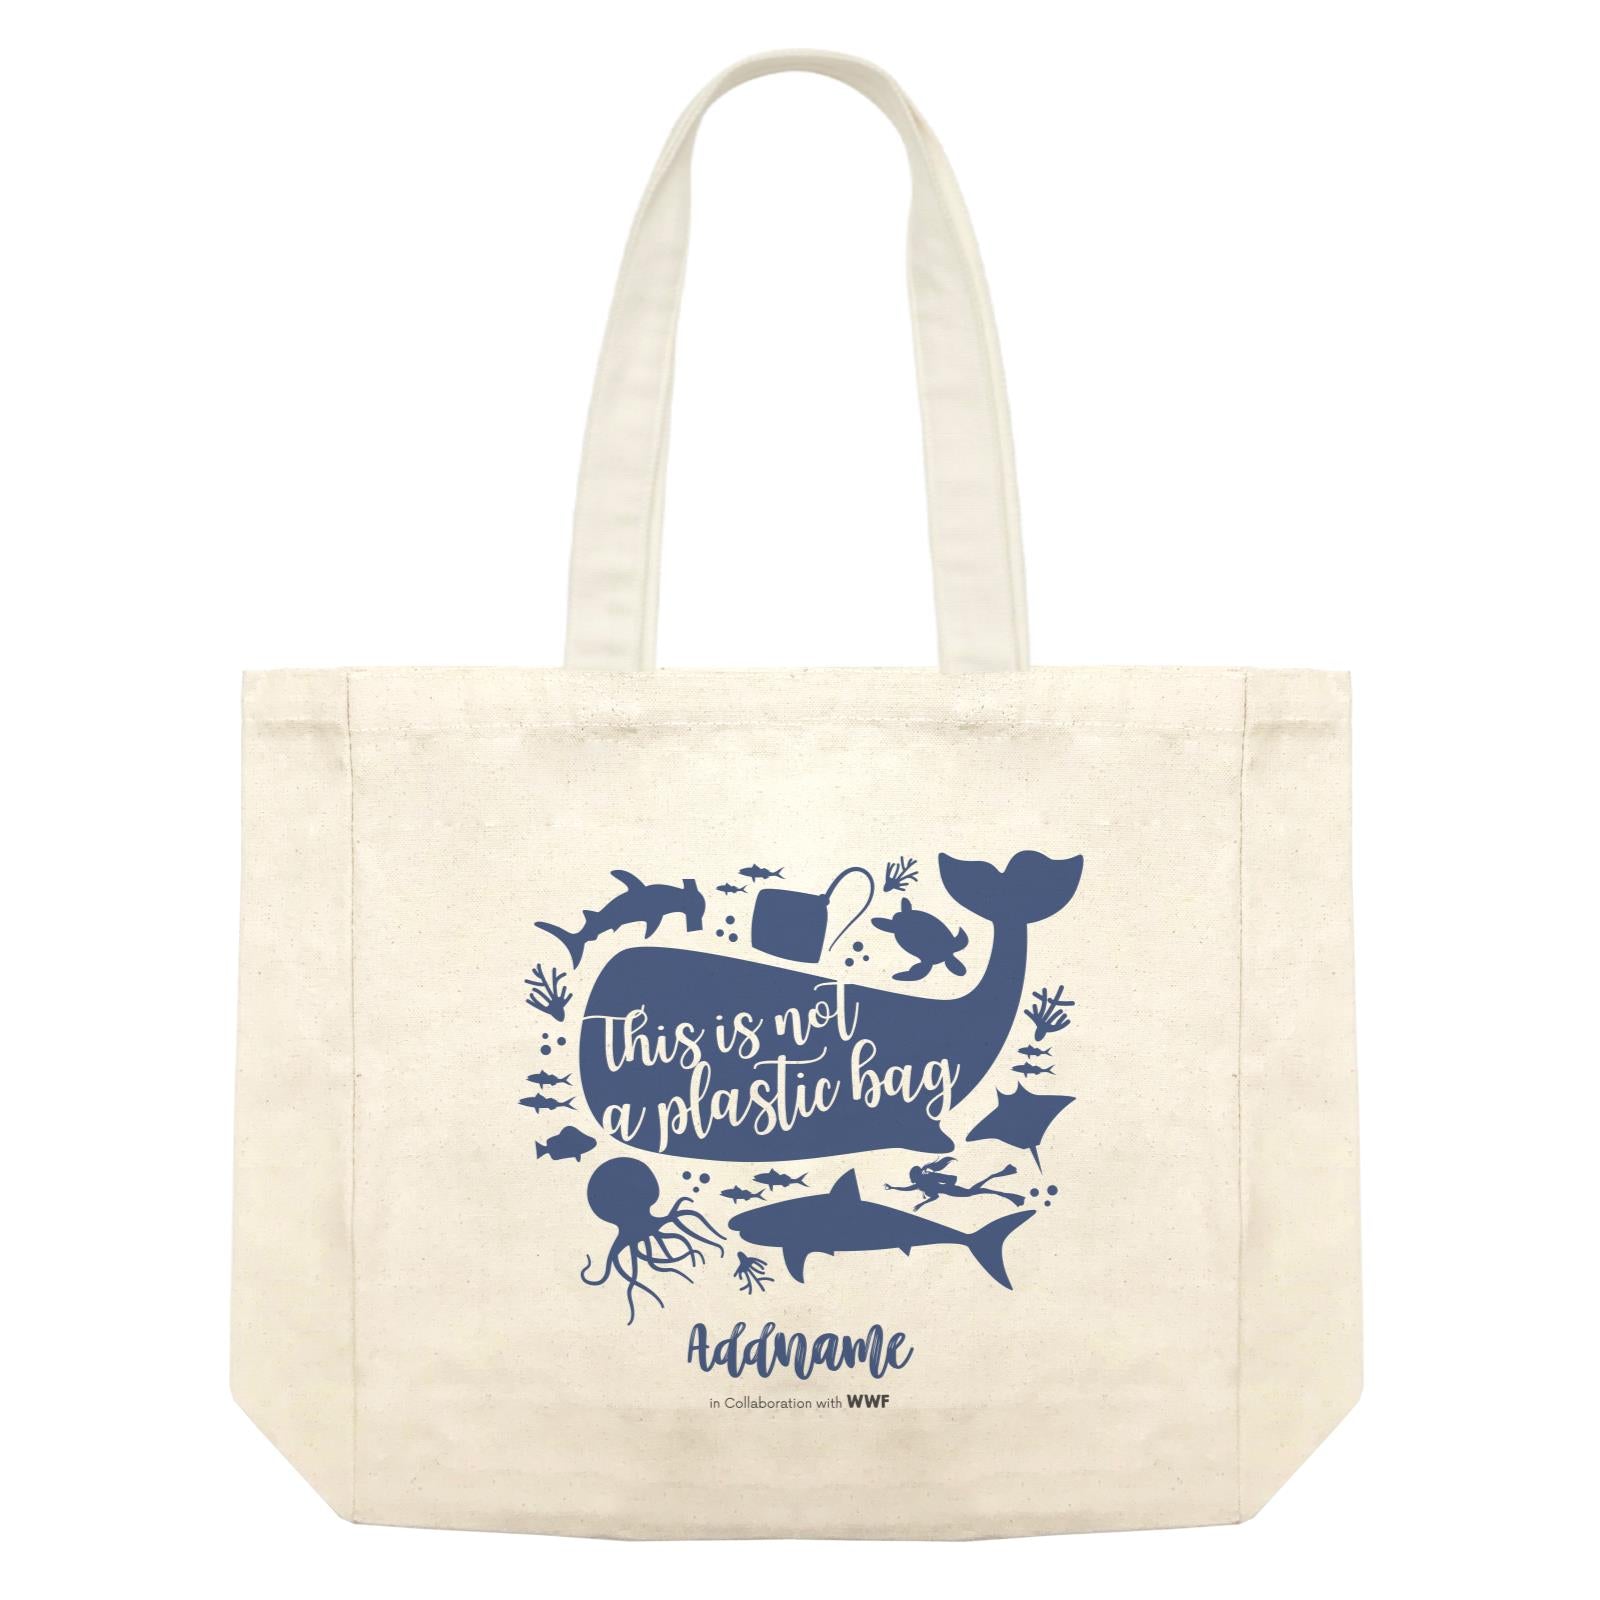 This is Not A Plastic Bag with Sea Animals Silhouette Addname Shopping Bag